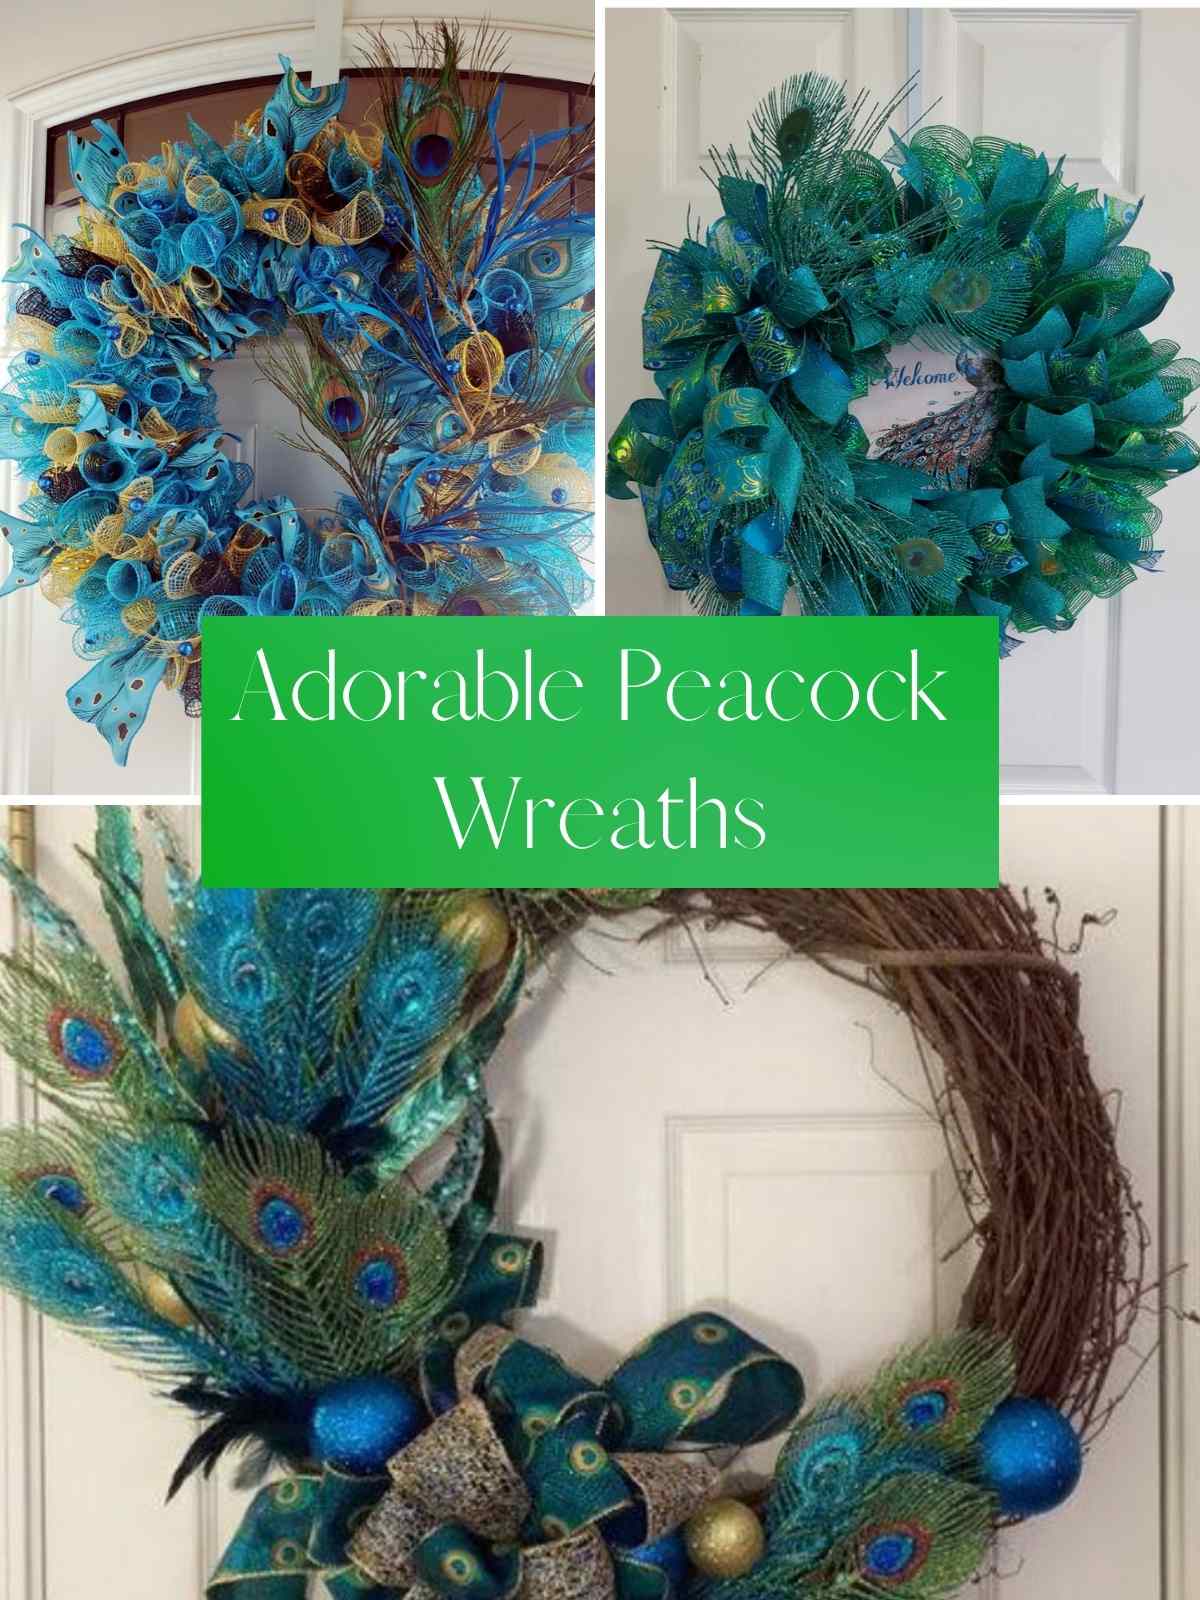 Adorable Peacock Wreaths with Deco Mesh